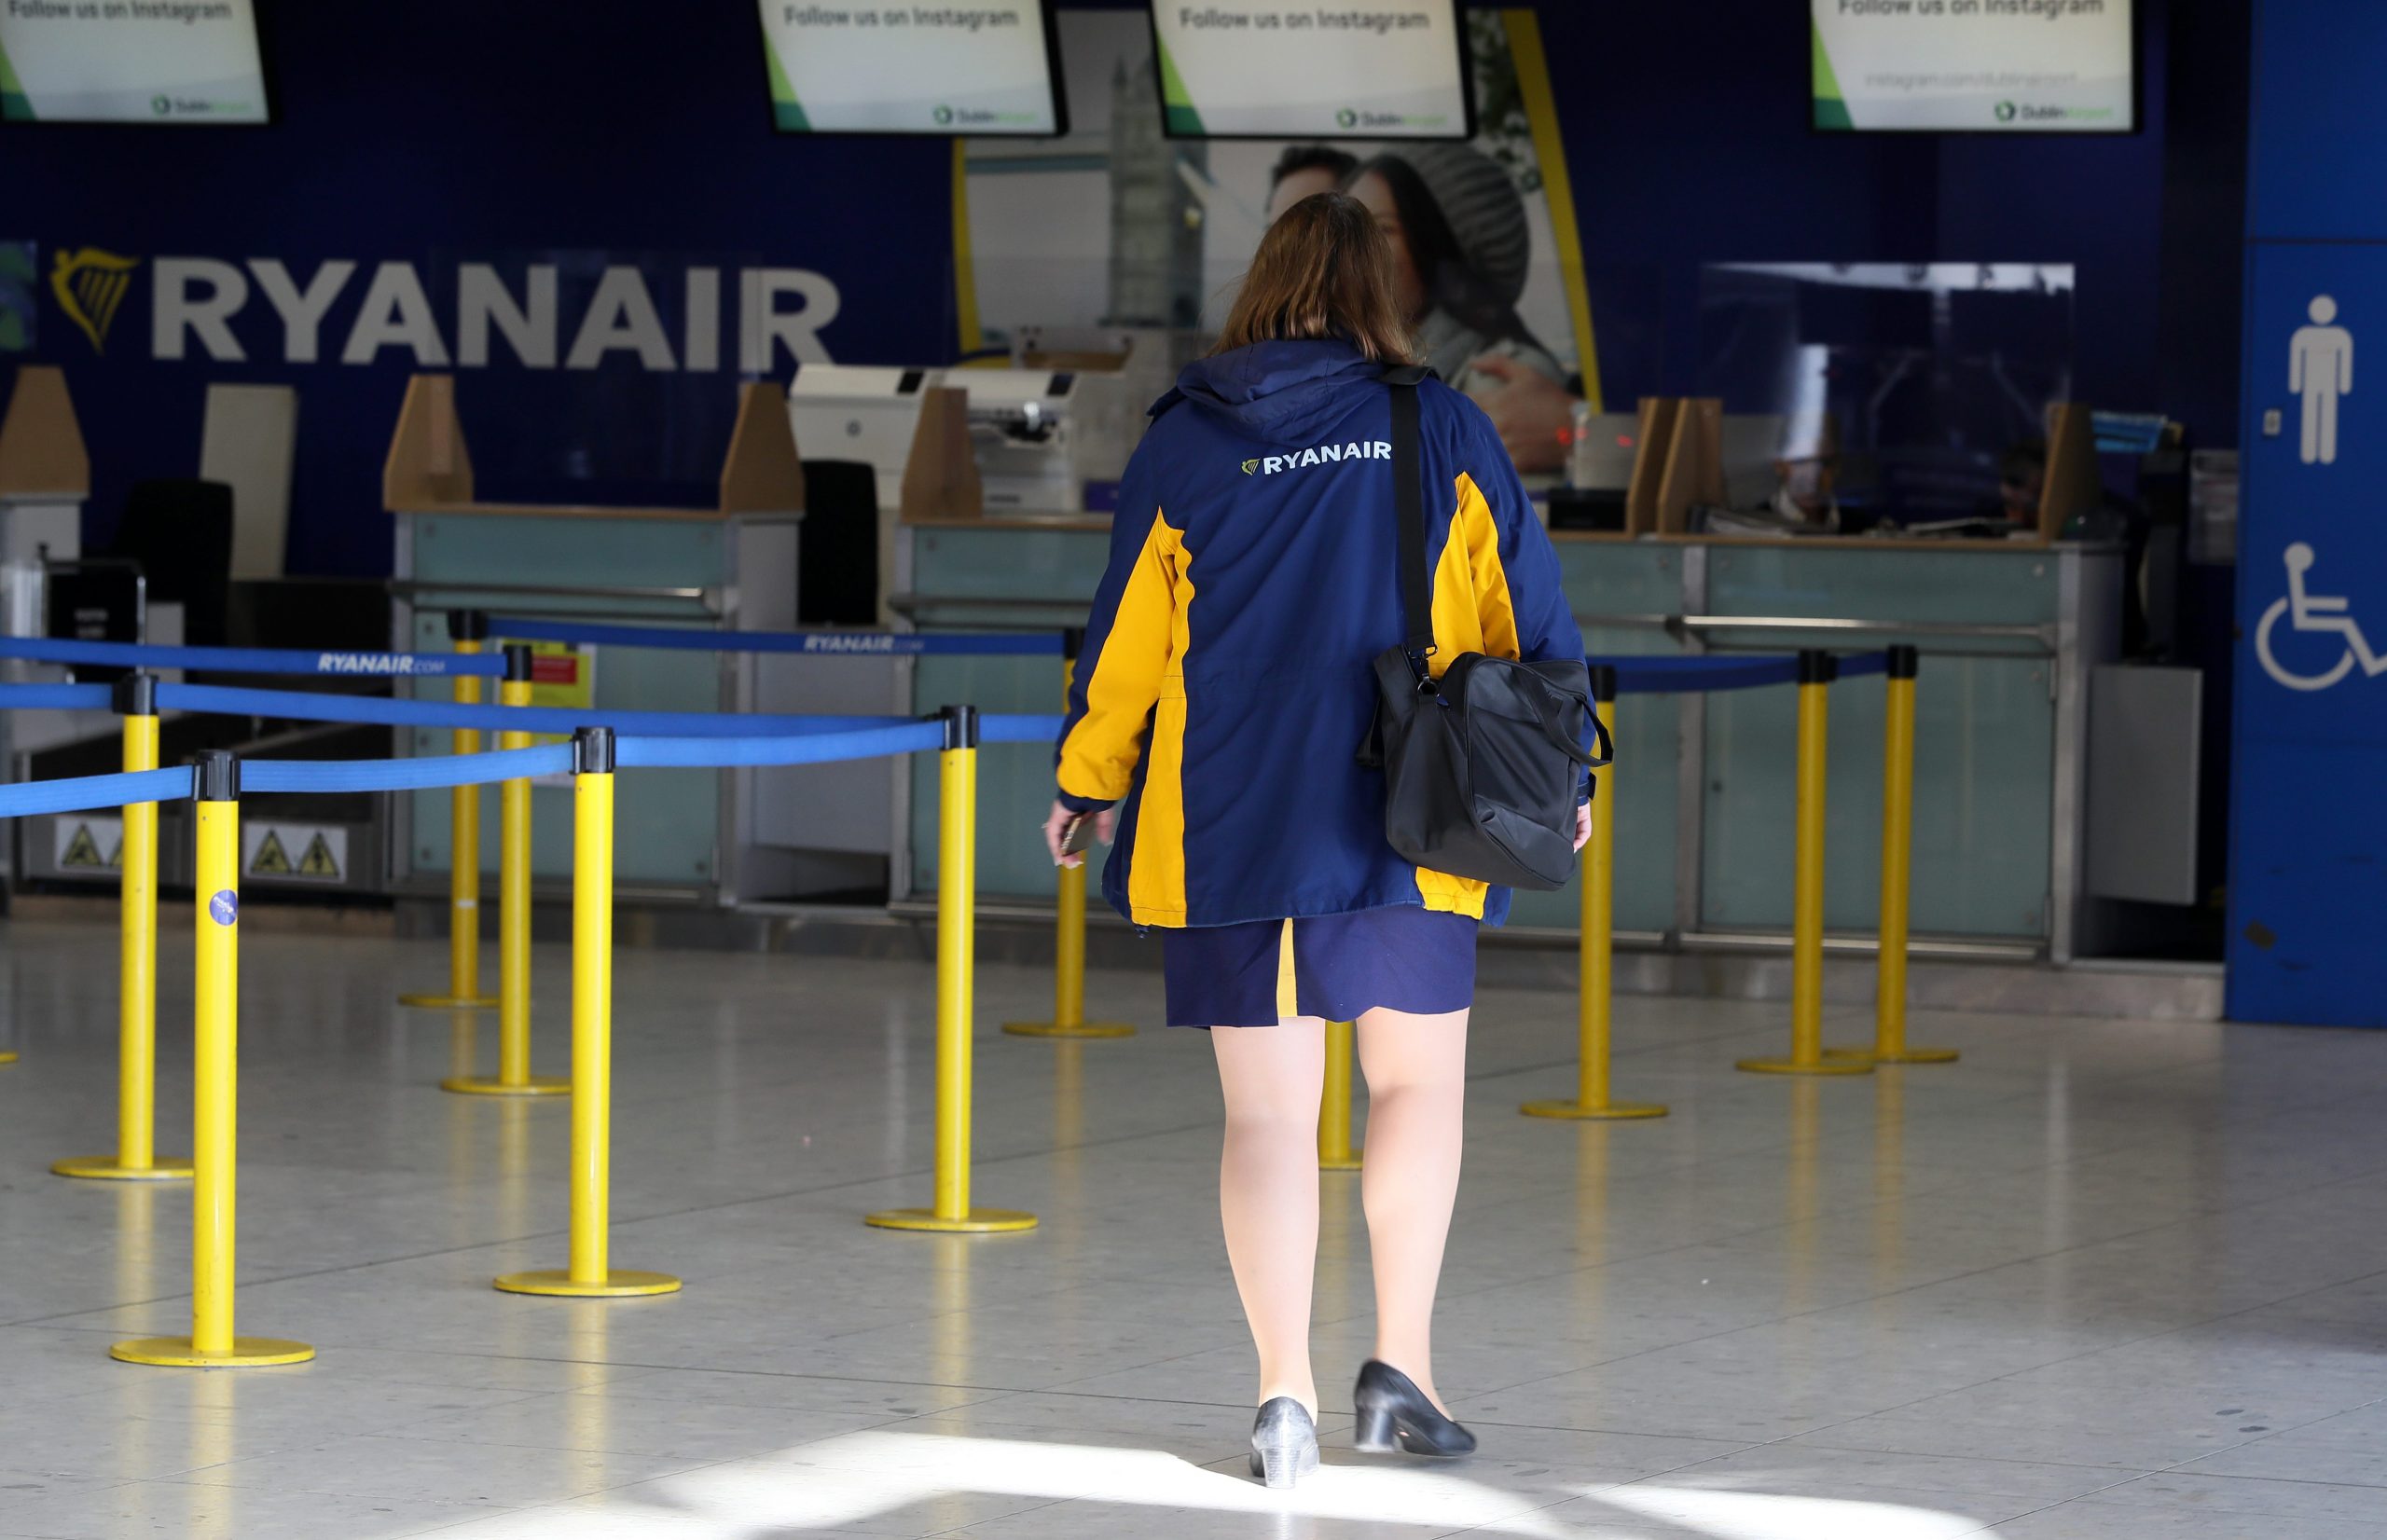 Ryanair claims cabin crew strikes in Spain and elsewhere will be 'relatively insignificant' in disrupting summer holiday flights